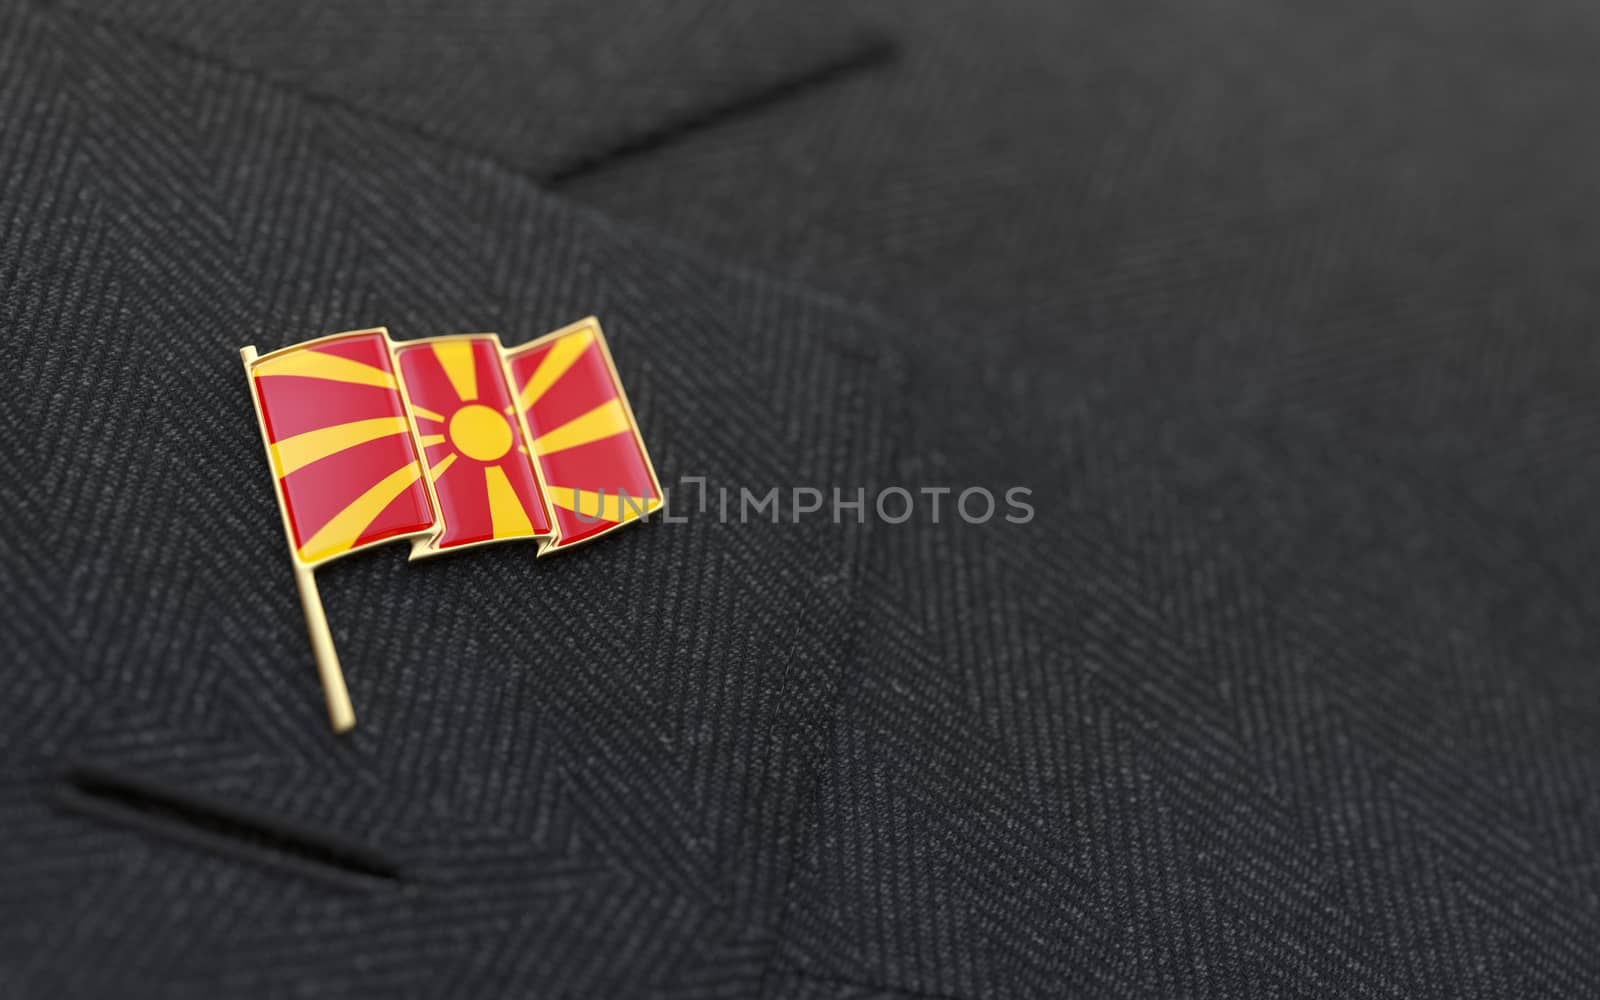 Macedonia flag lapel pin on the collar of a business suit jacket shows patriotism